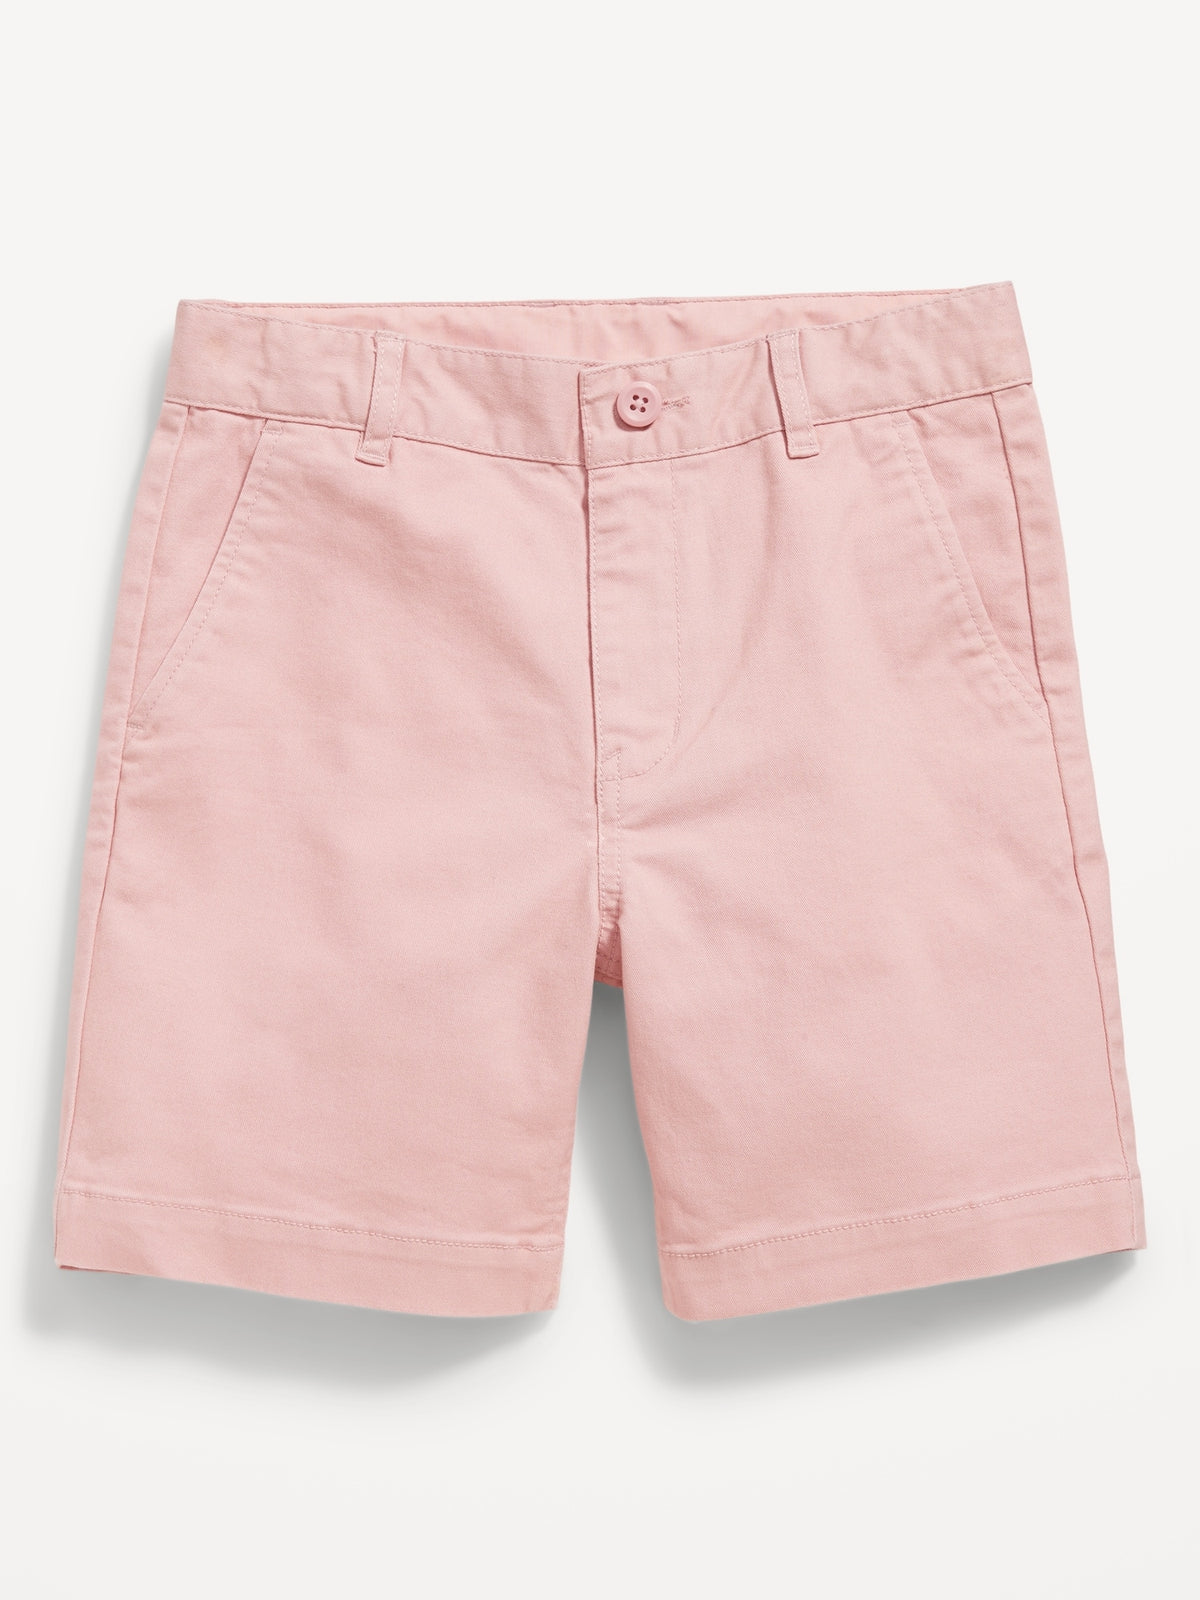 Built-In Flex Straight Twill Shorts for Boys (Above Knee) - Old Navy  Philippines